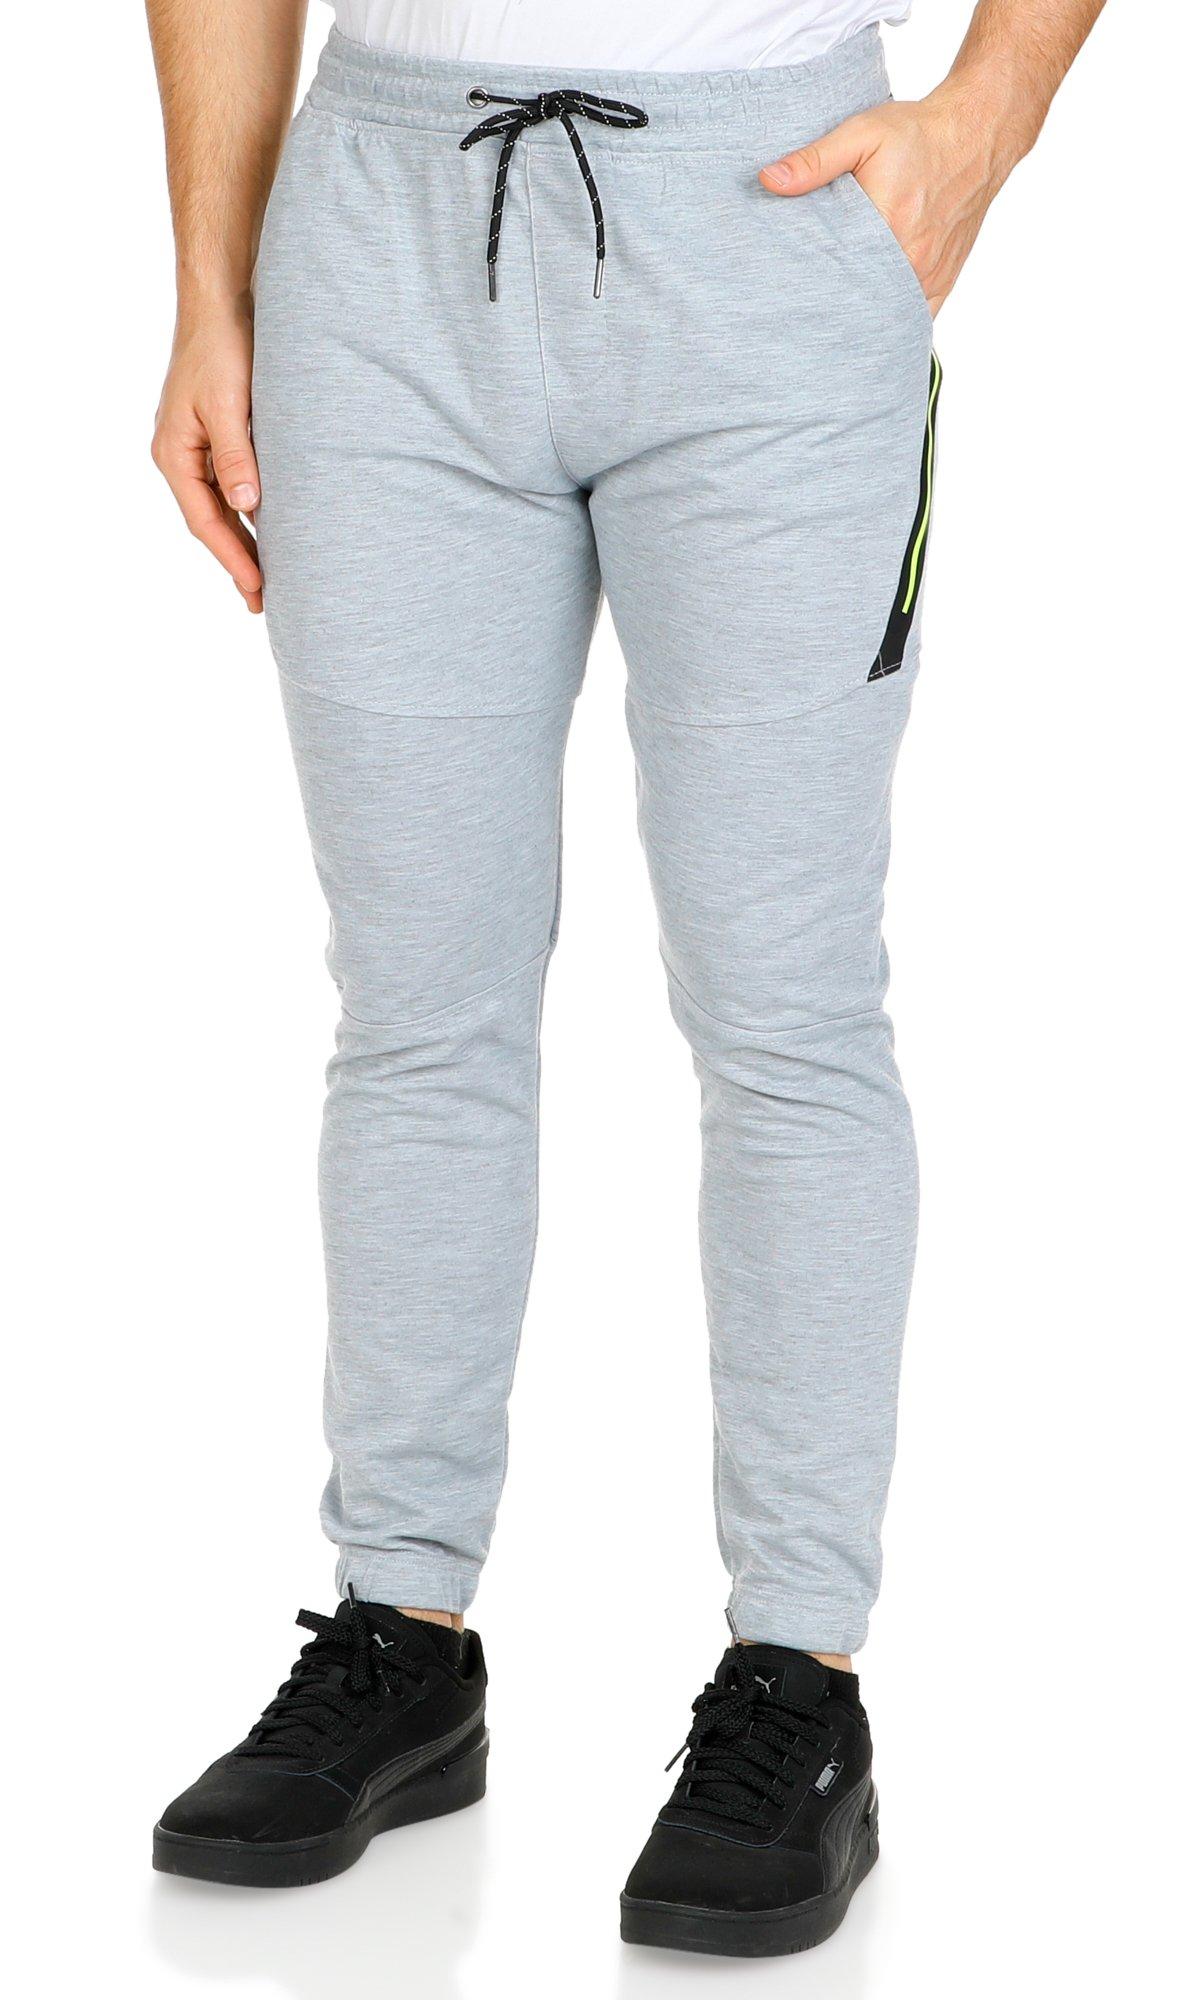 Men's Solid Heathered Joggers